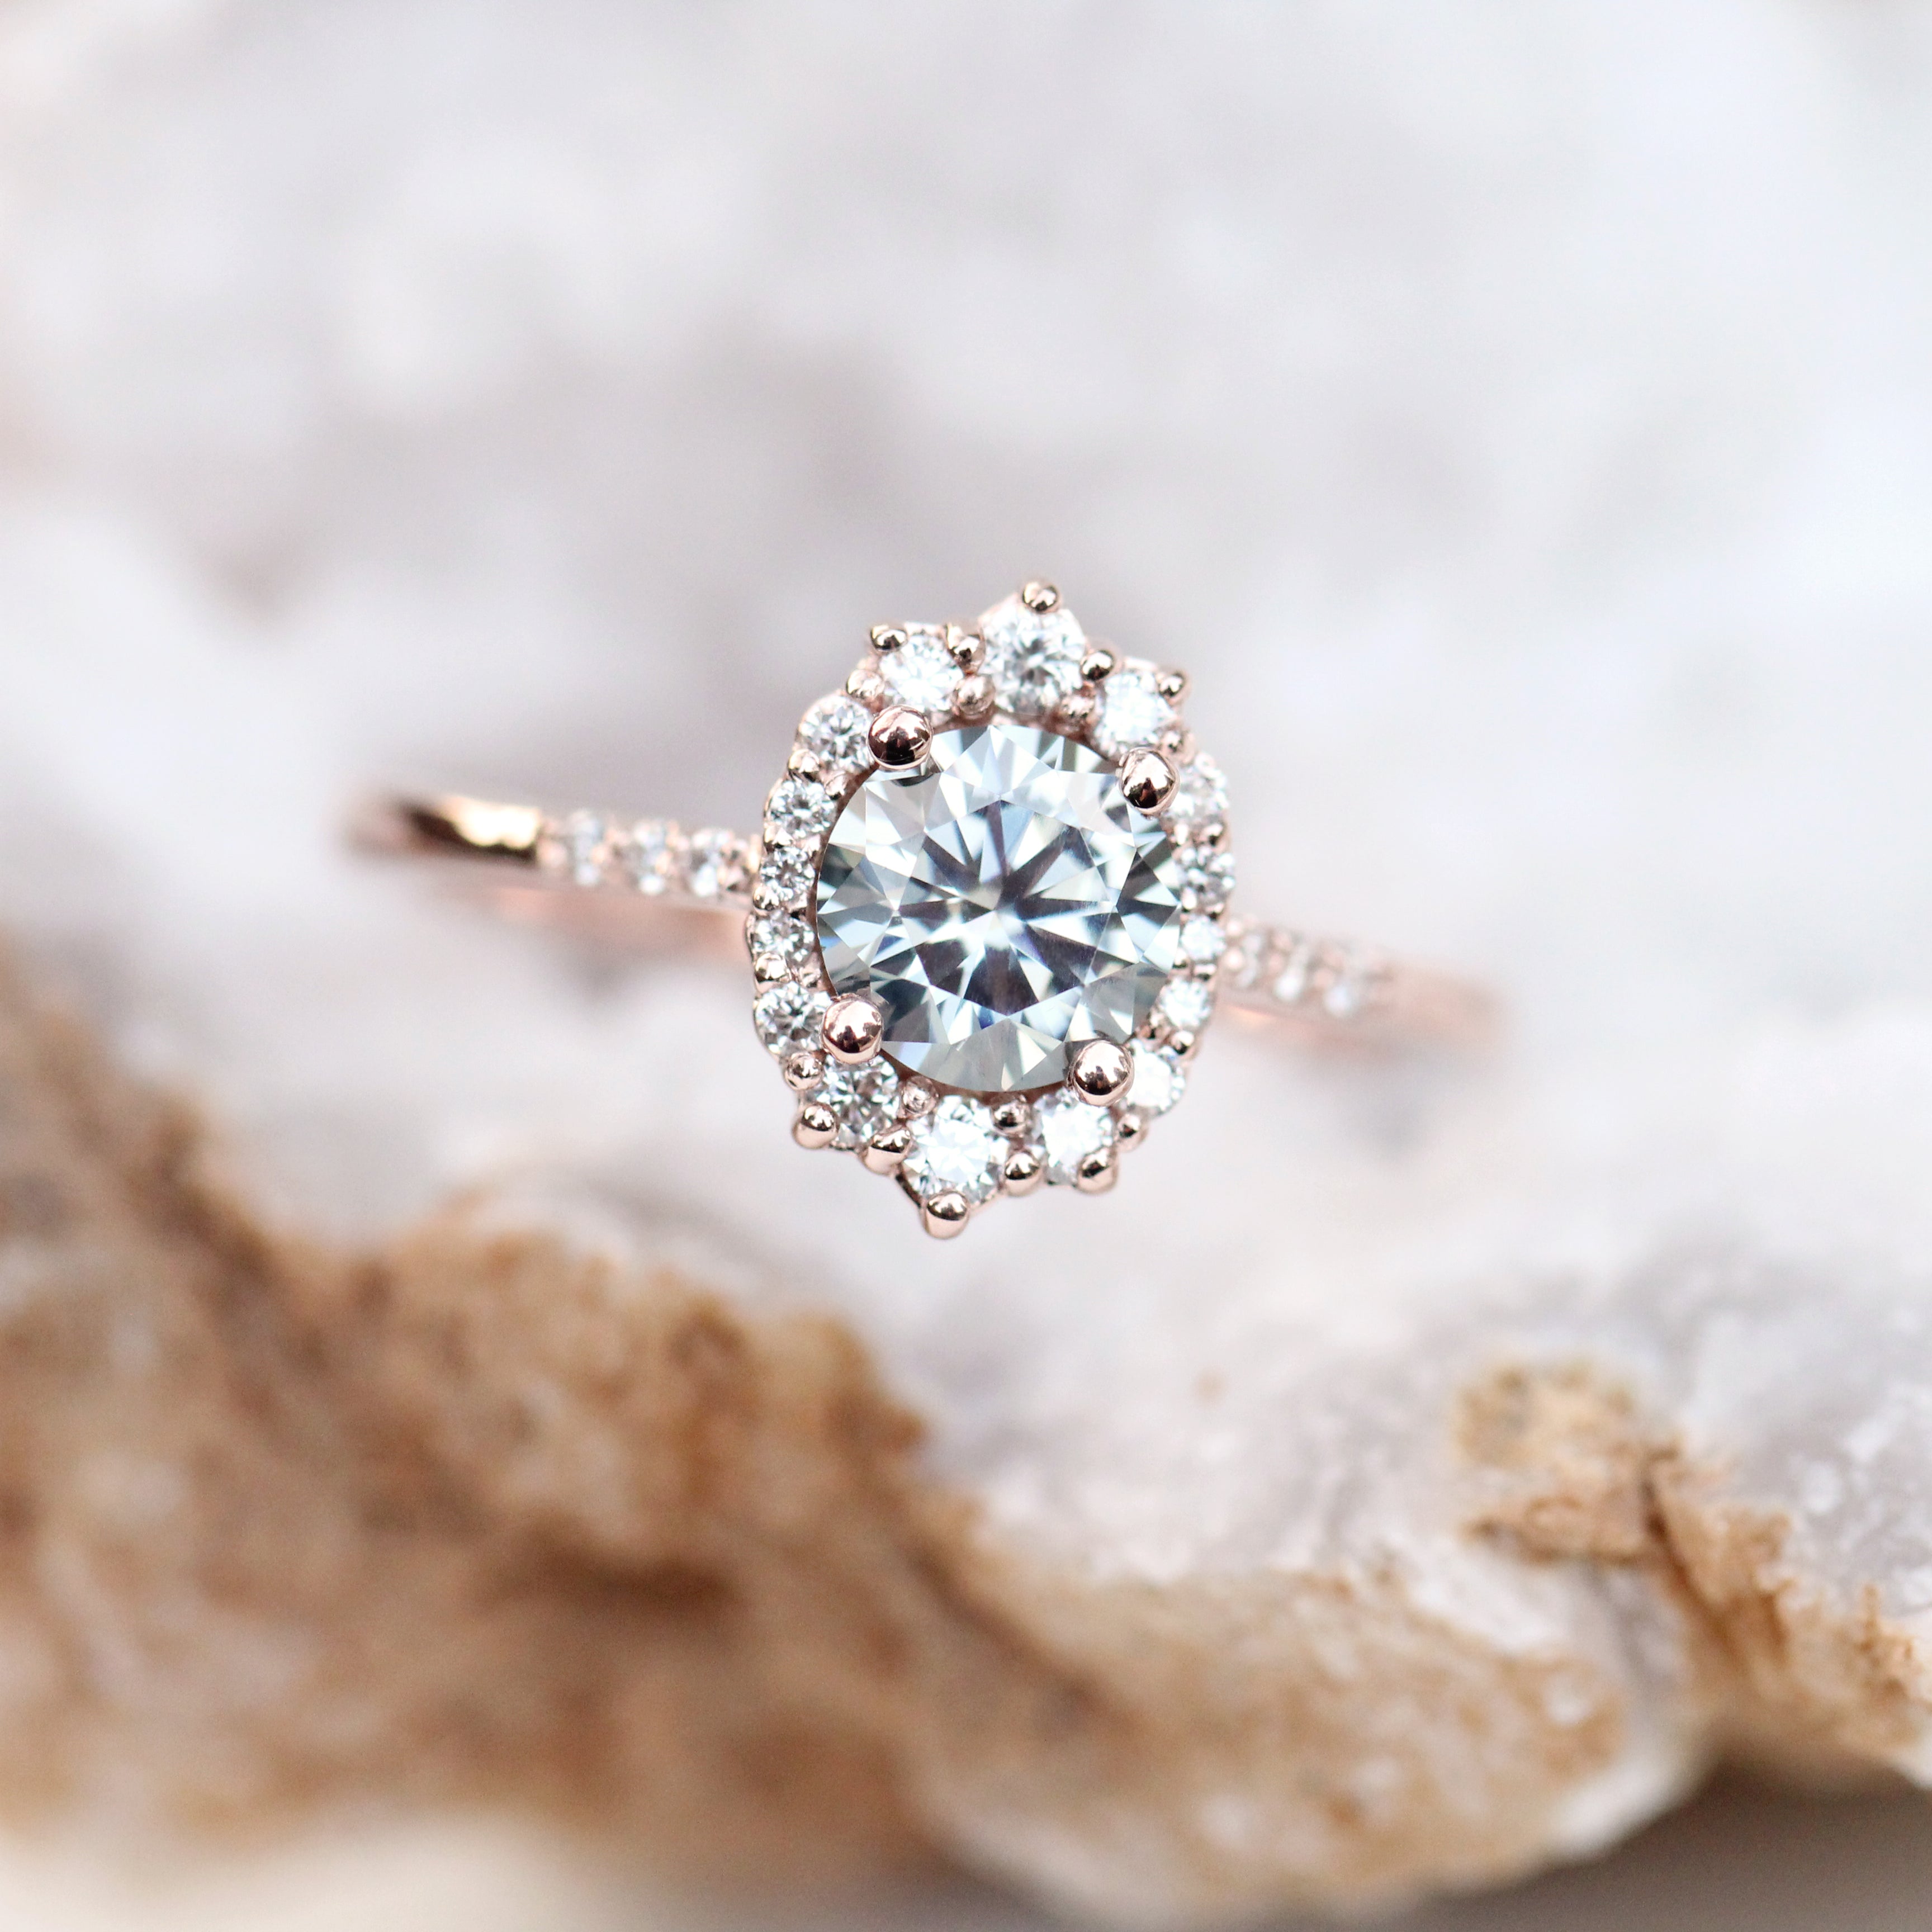 Grace Ring with a 0.75 Carat Gray Moissanite Surrounded by White Diamond Accents in 14k Rose Gold - Ready to Size and Ship - Midwinter Co. Alternative Bridal Rings and Modern Fine Jewelry